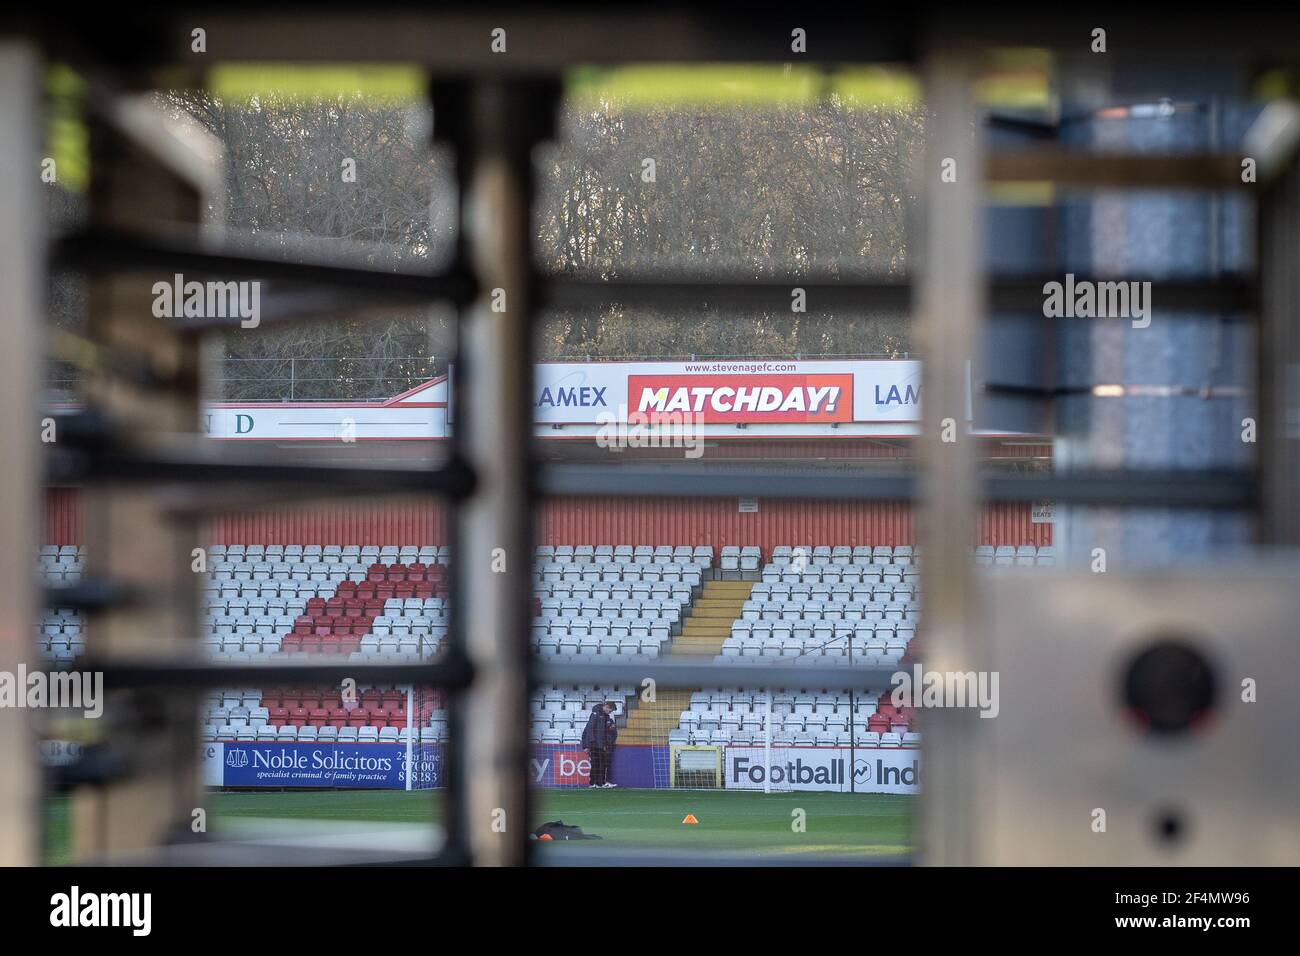 Football stadium turnstile viewed from the outside looking in on match day at Lamex Stadium, Stevenage Football Club, Stevenage, Hertfordshire, UK Stock Photo